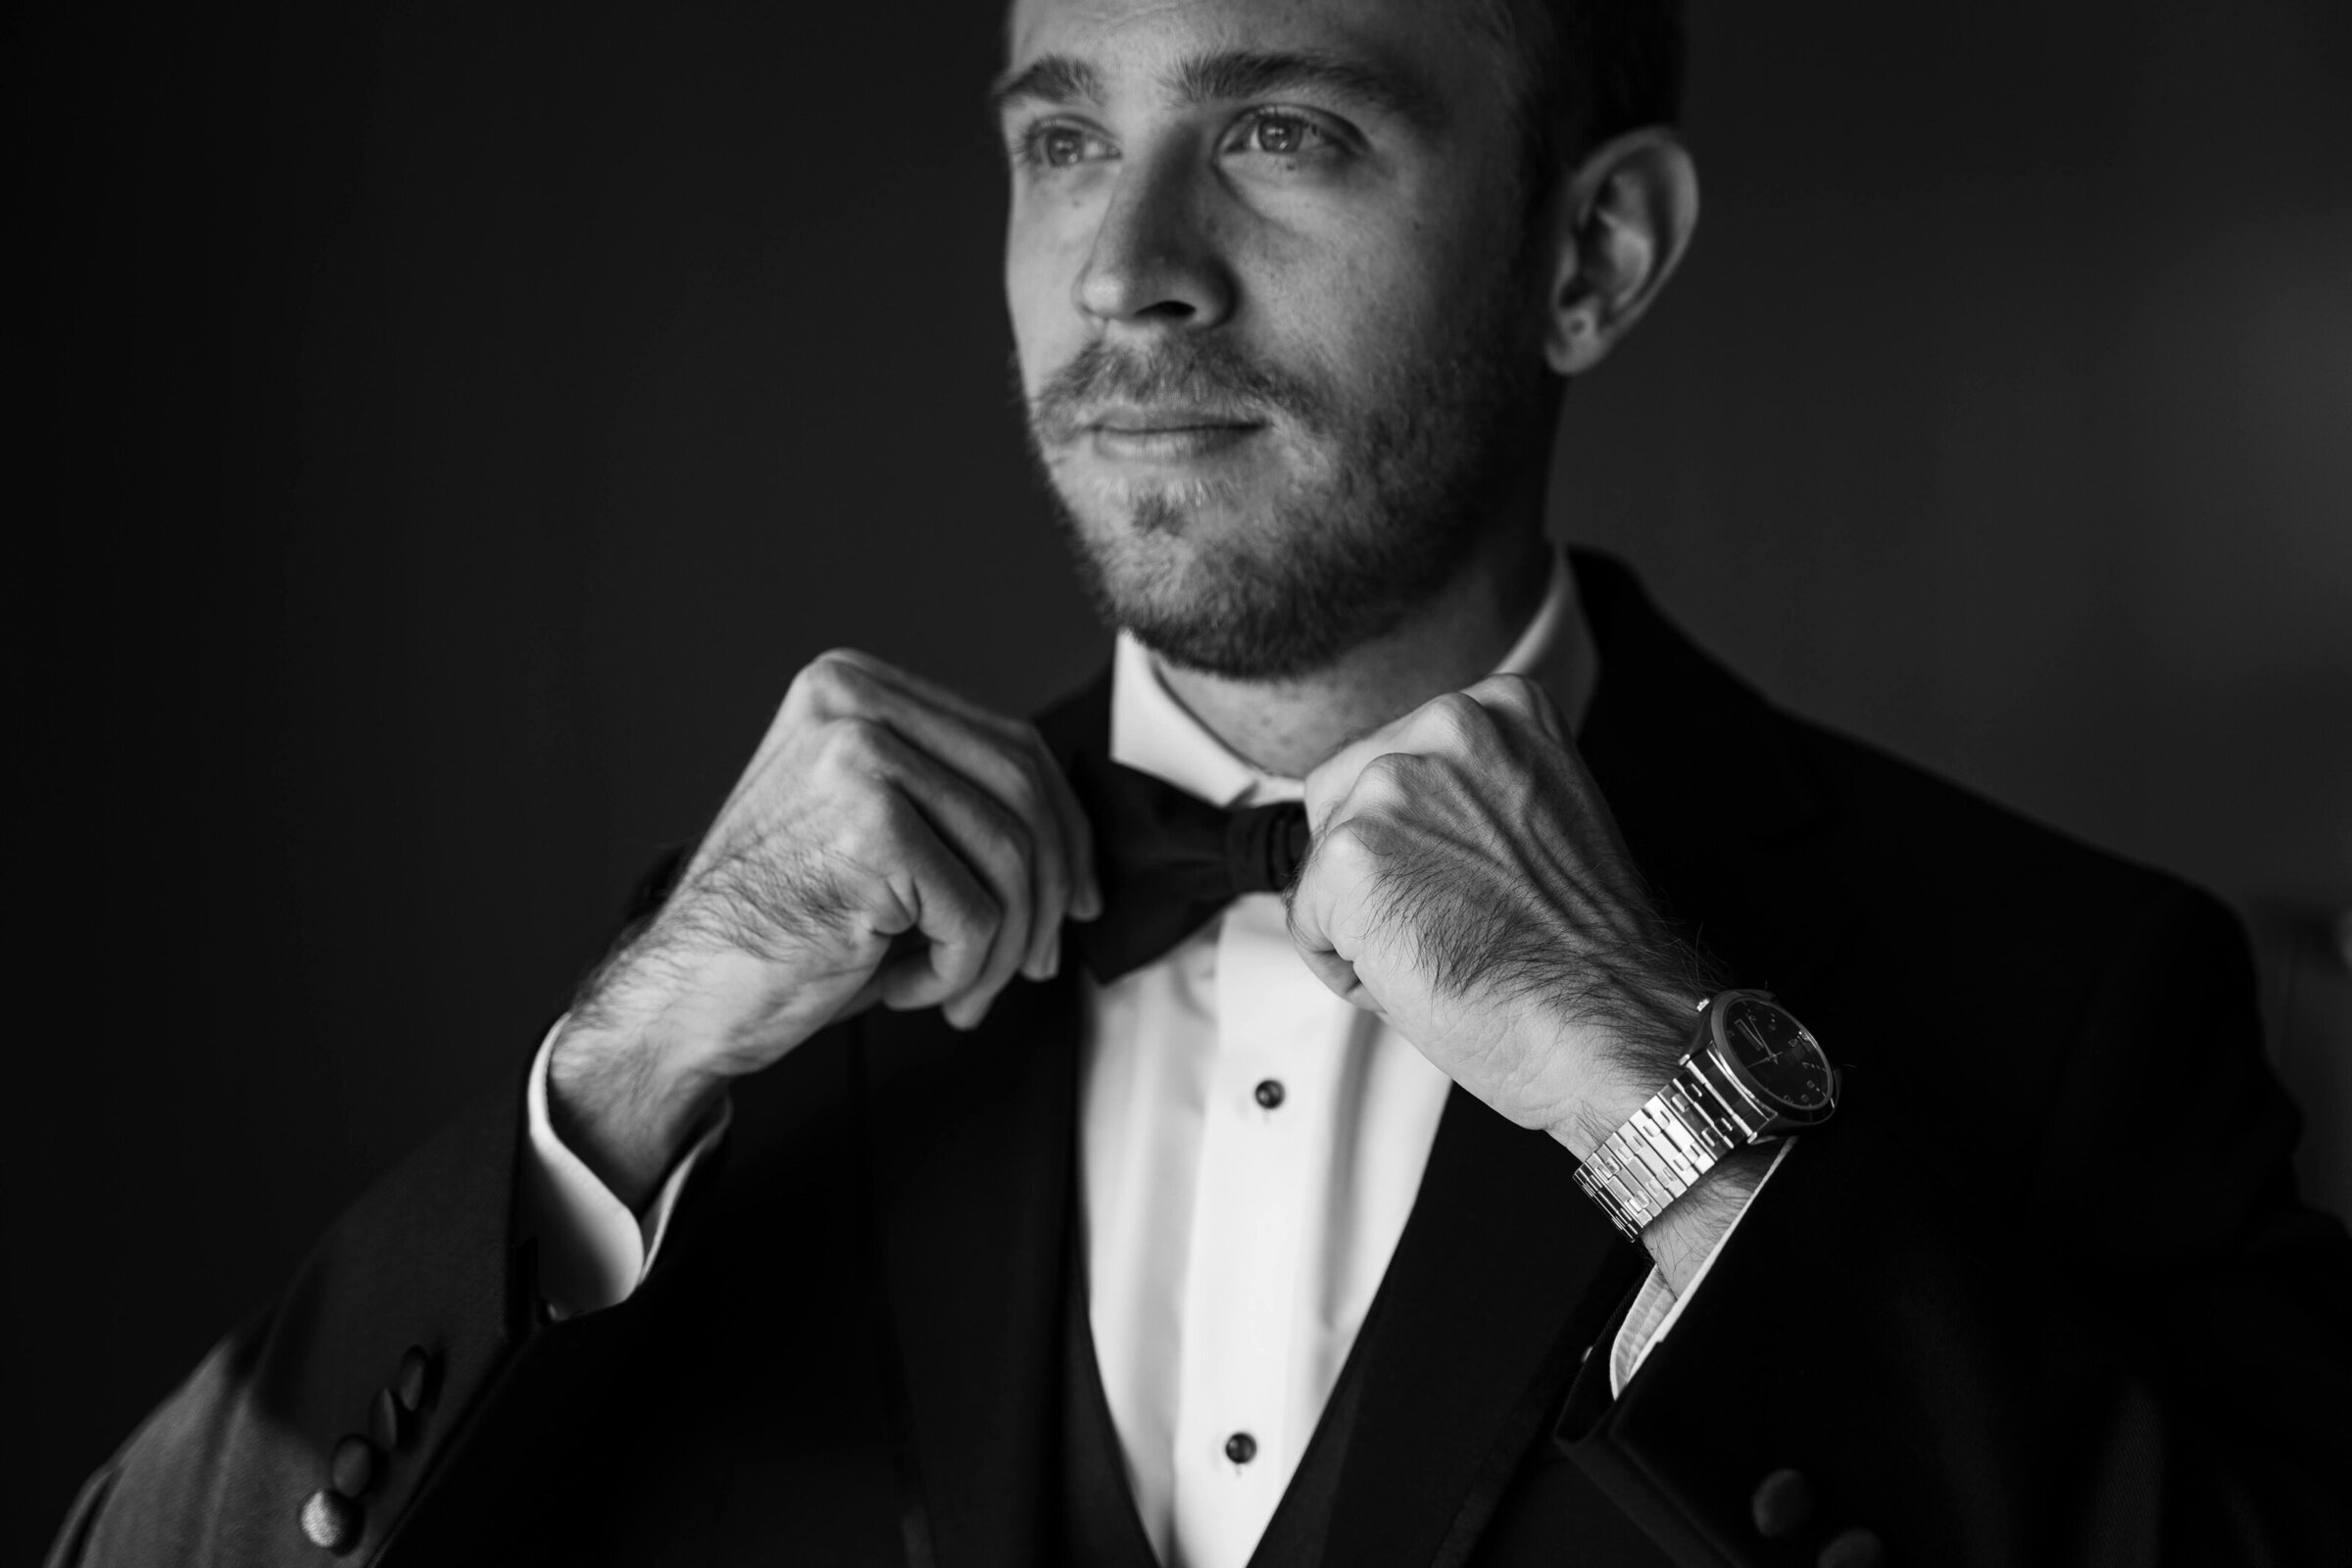 An up close black and white photograph of a groom straightening his bowtie